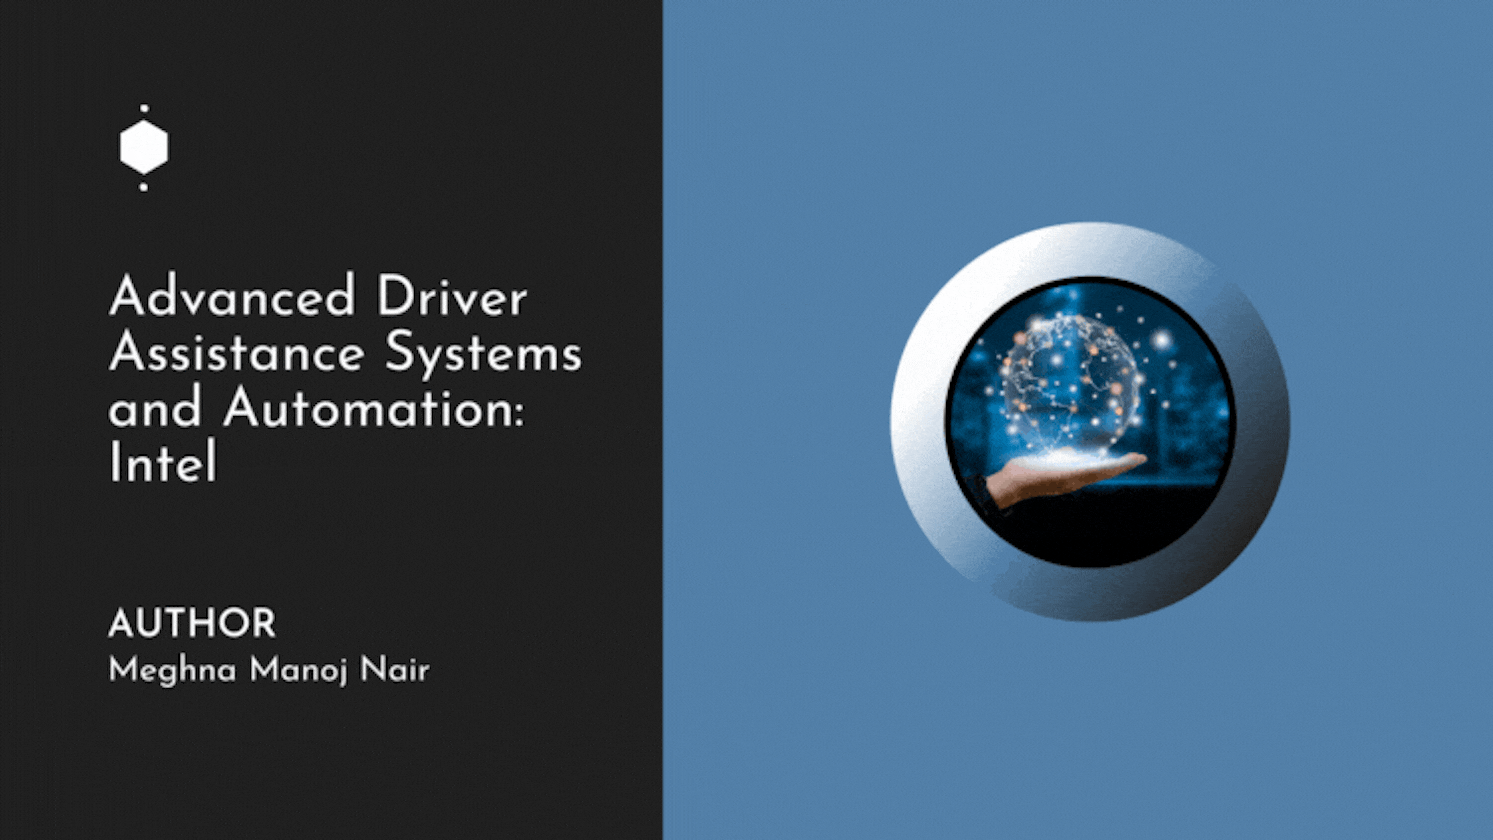 Advanced Driver Assistance Systems and Automation: Intel